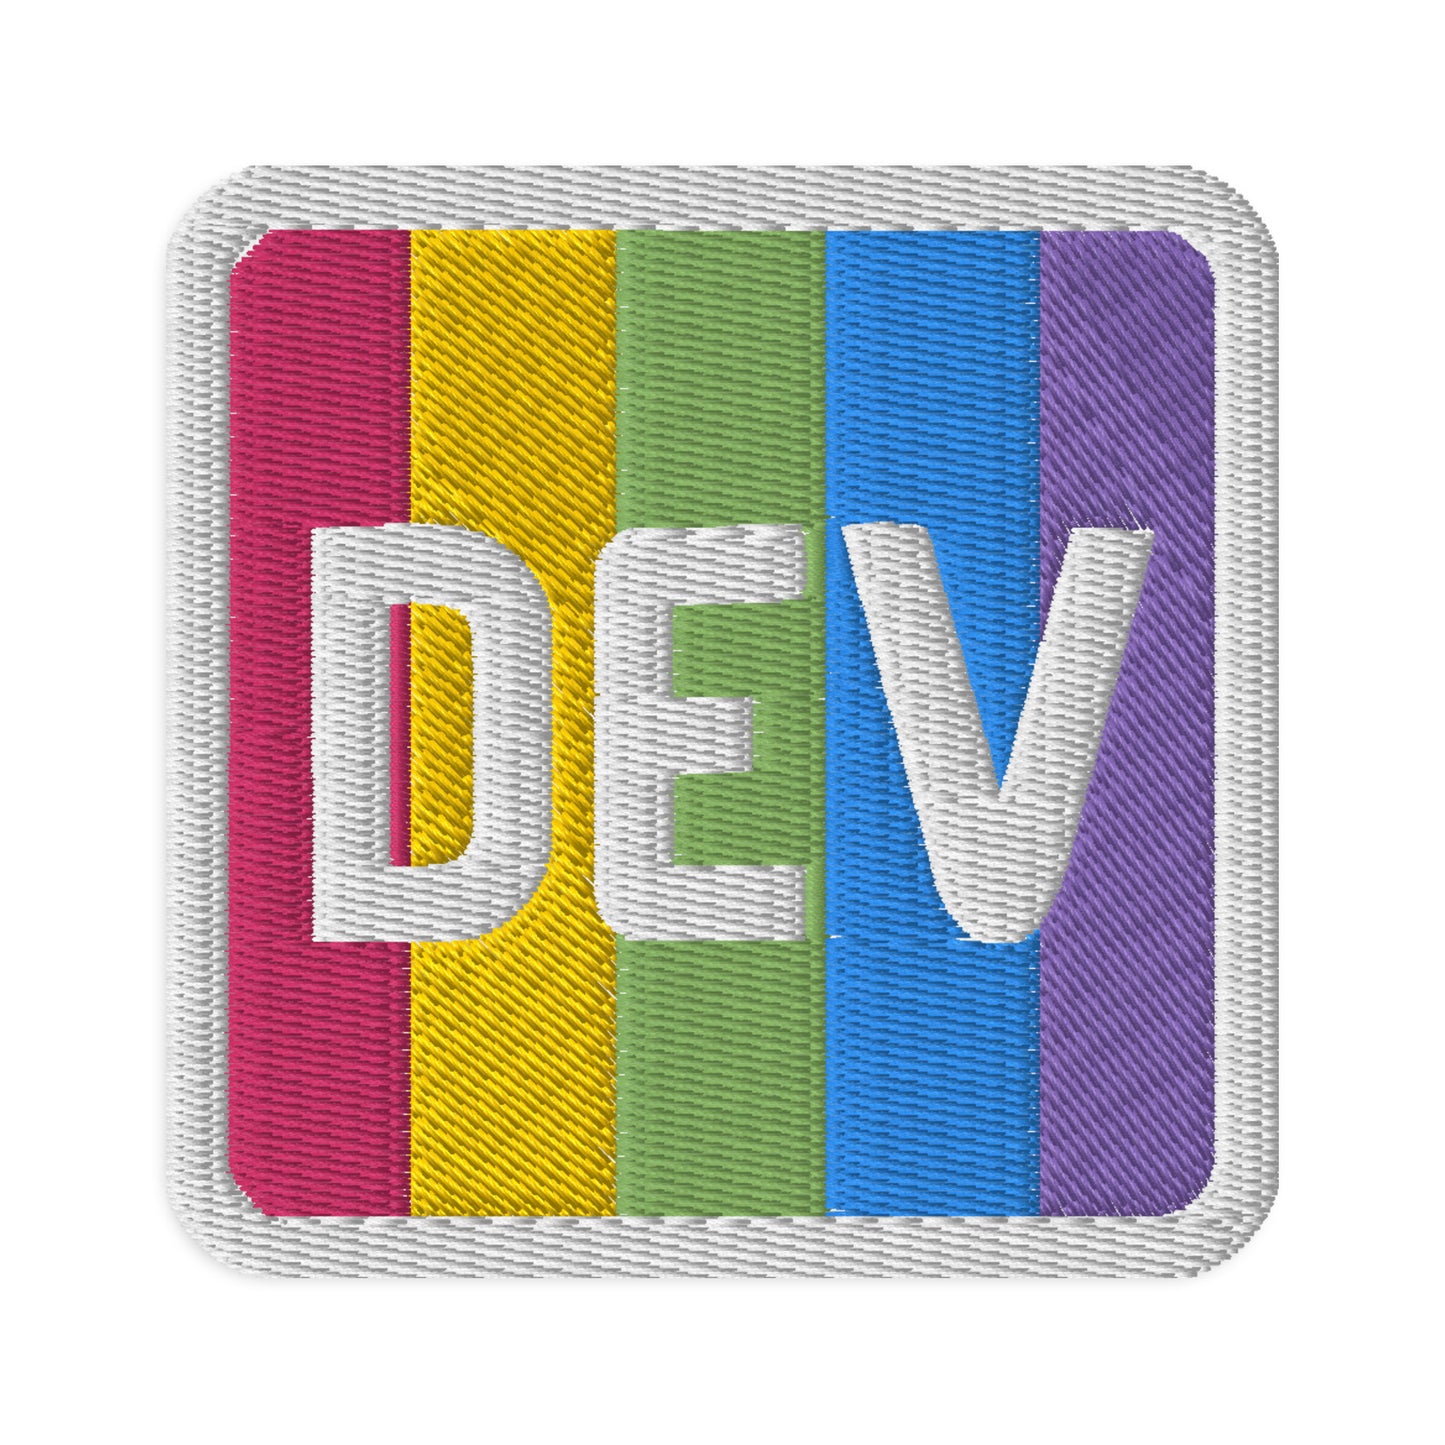 DEV Pride Embroidered Patch